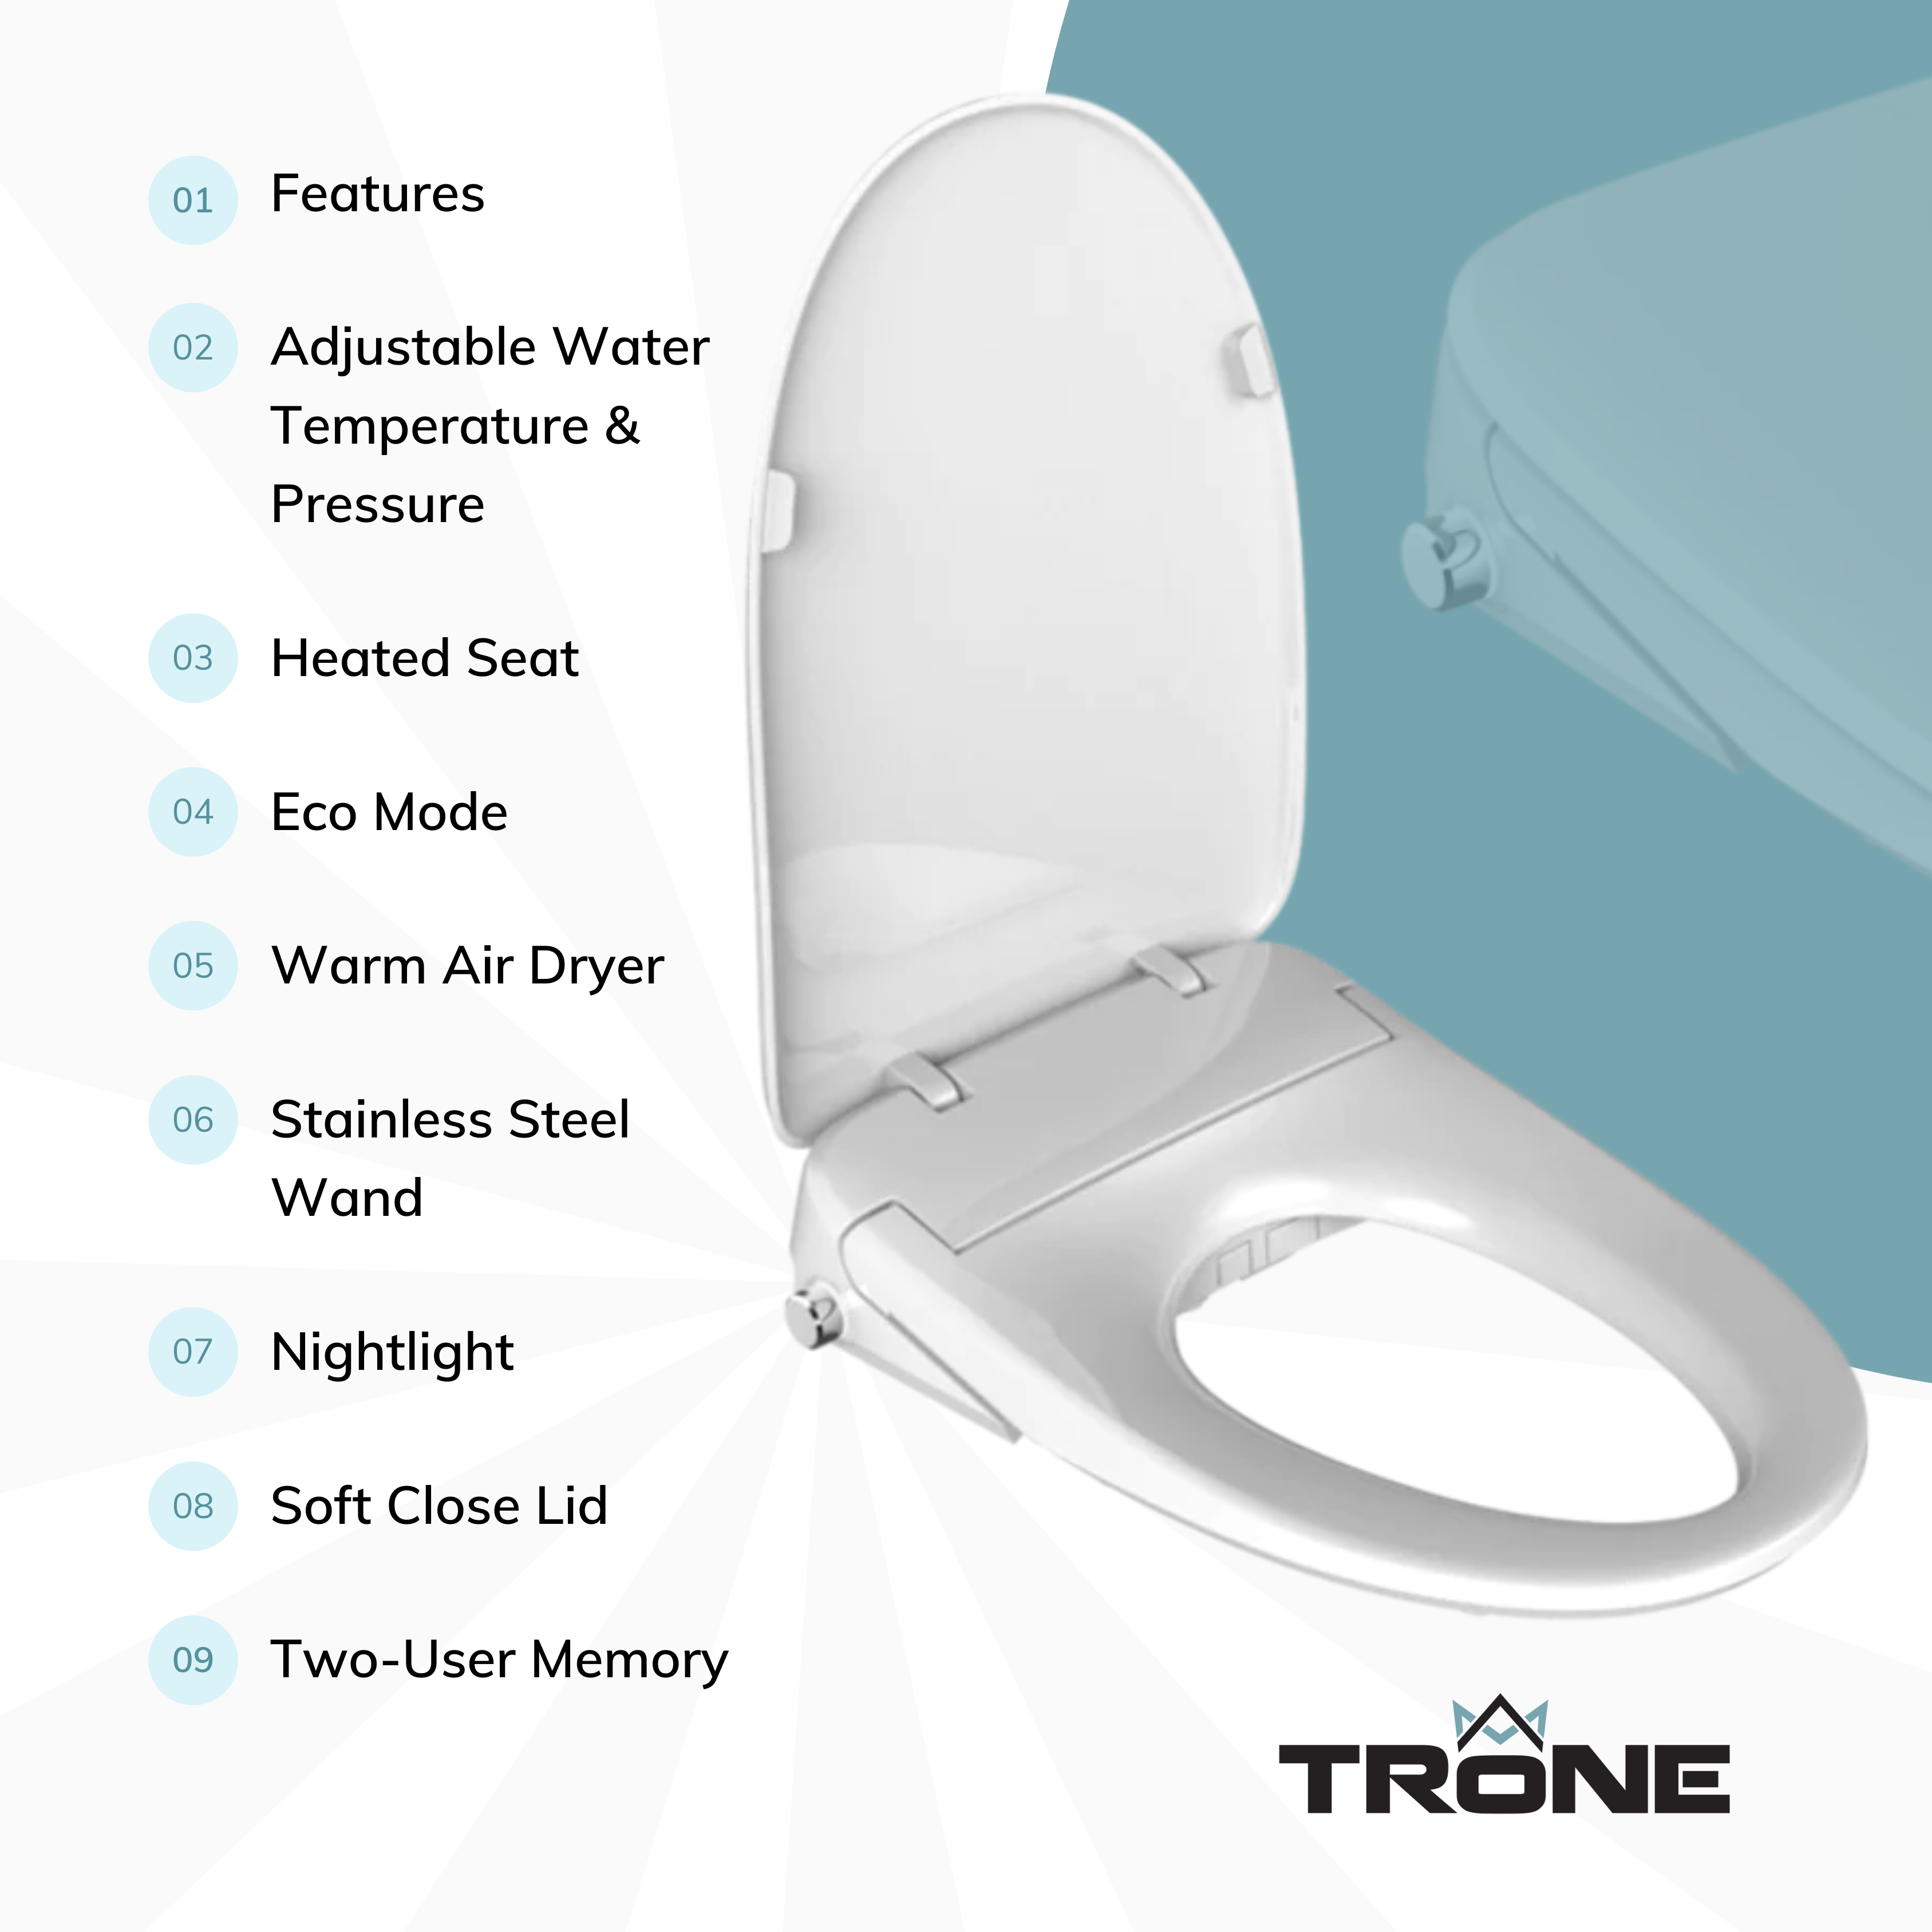 An infographic about Trone Electronic Bidet Seat.